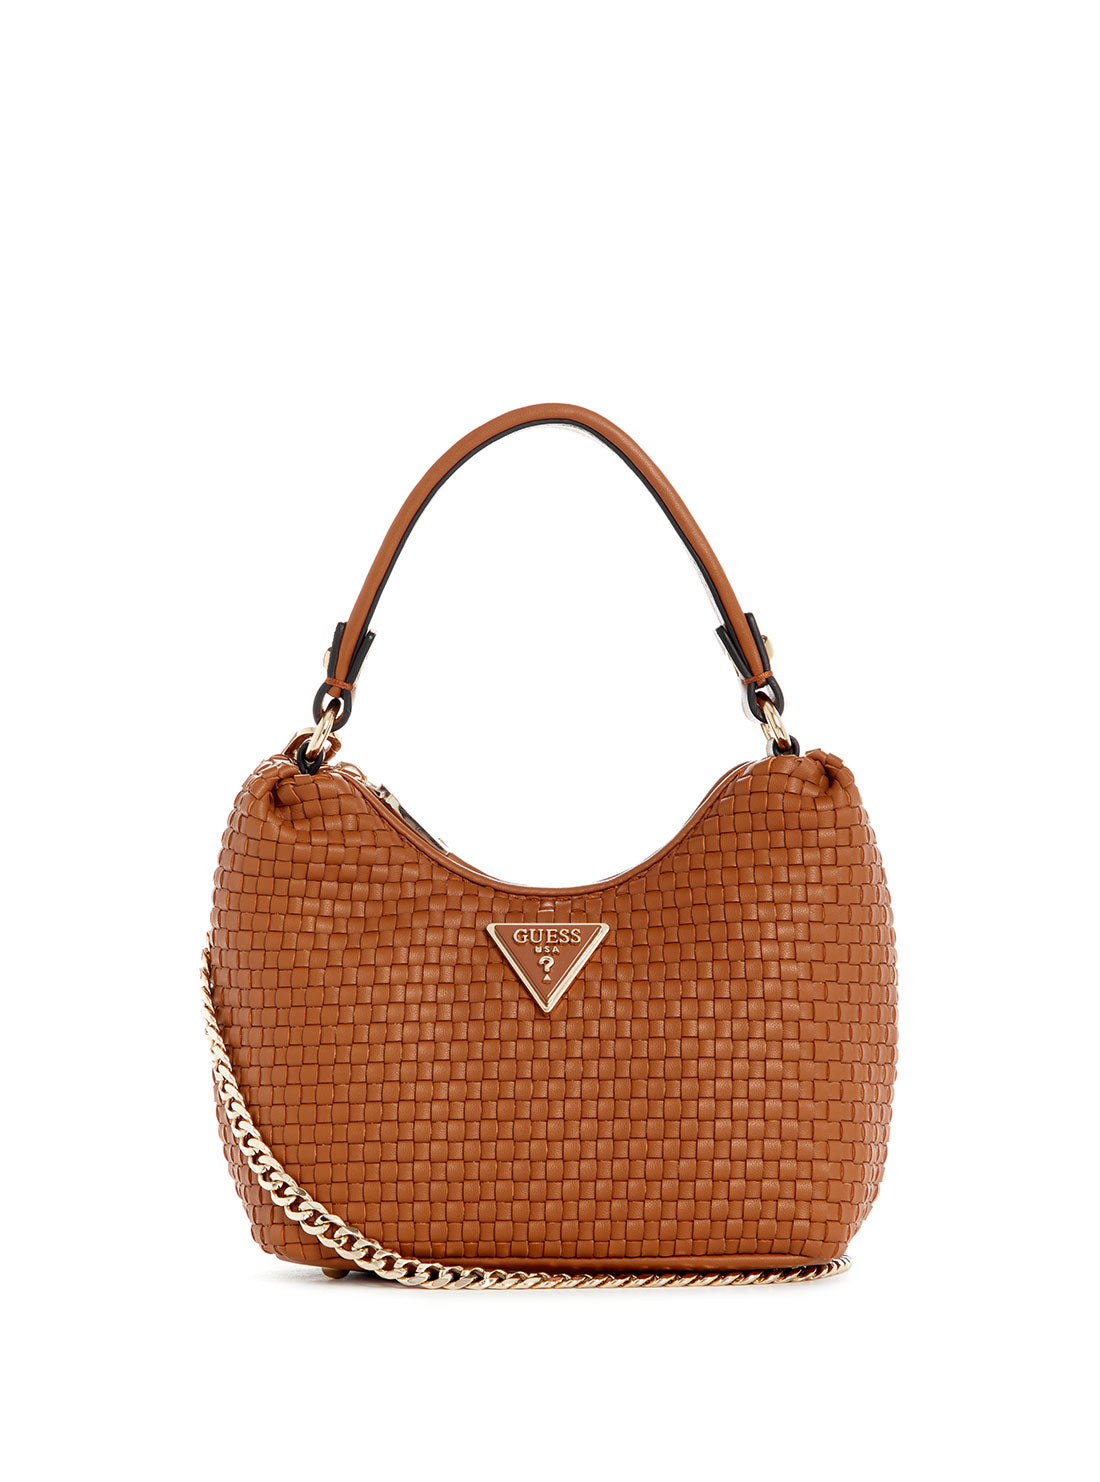 GUESS Brown Etel Mini Hobo Bag front view